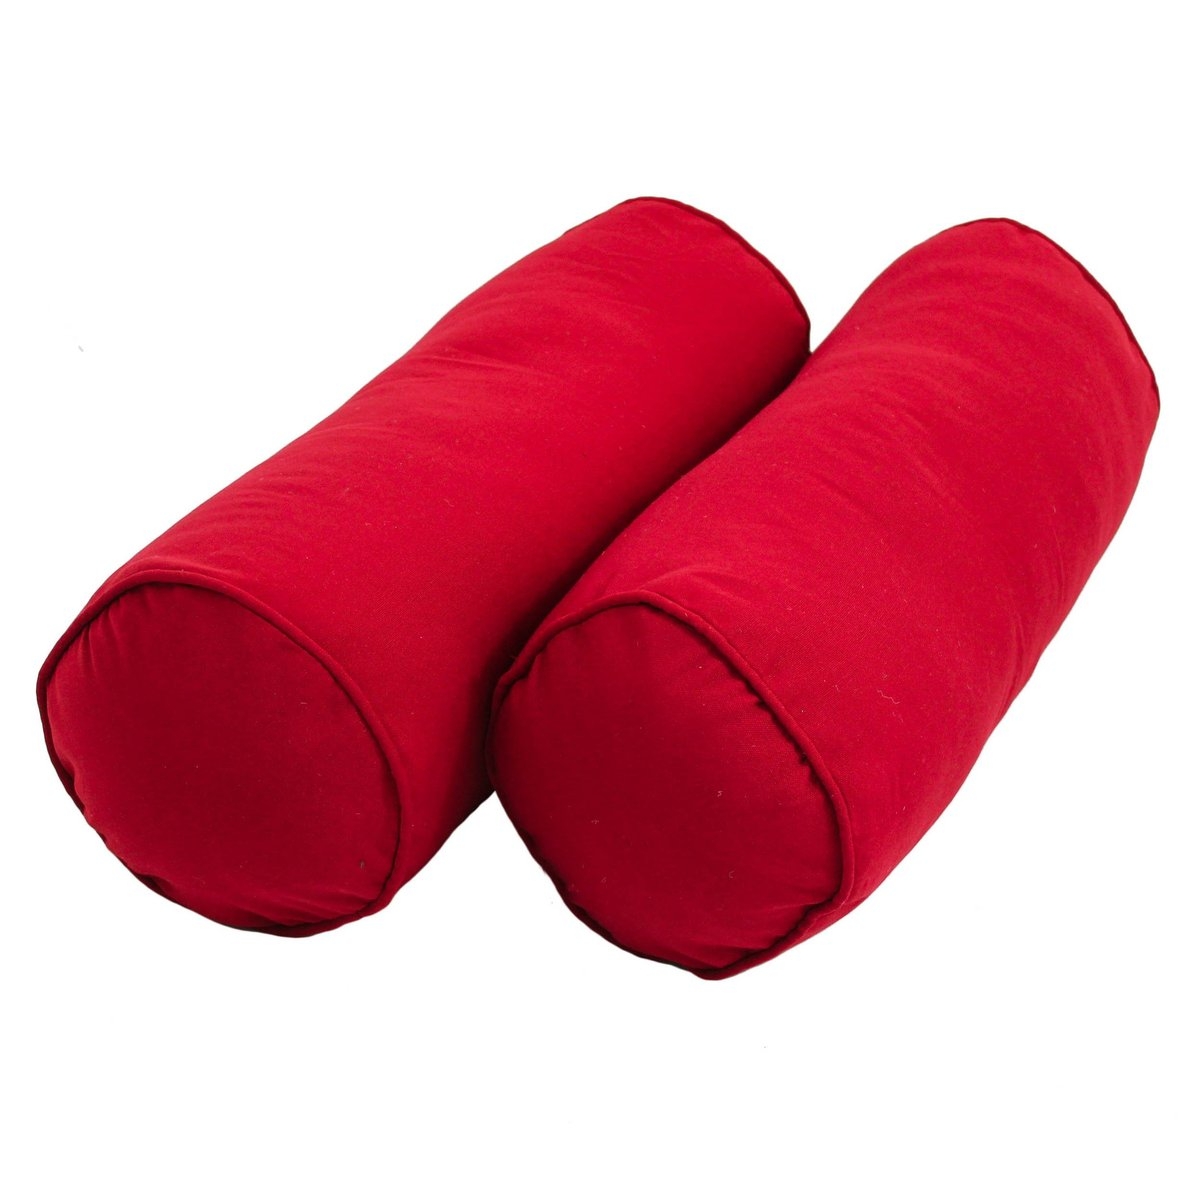 Needles Solid Twill Bolster Pillows (Set of 2)